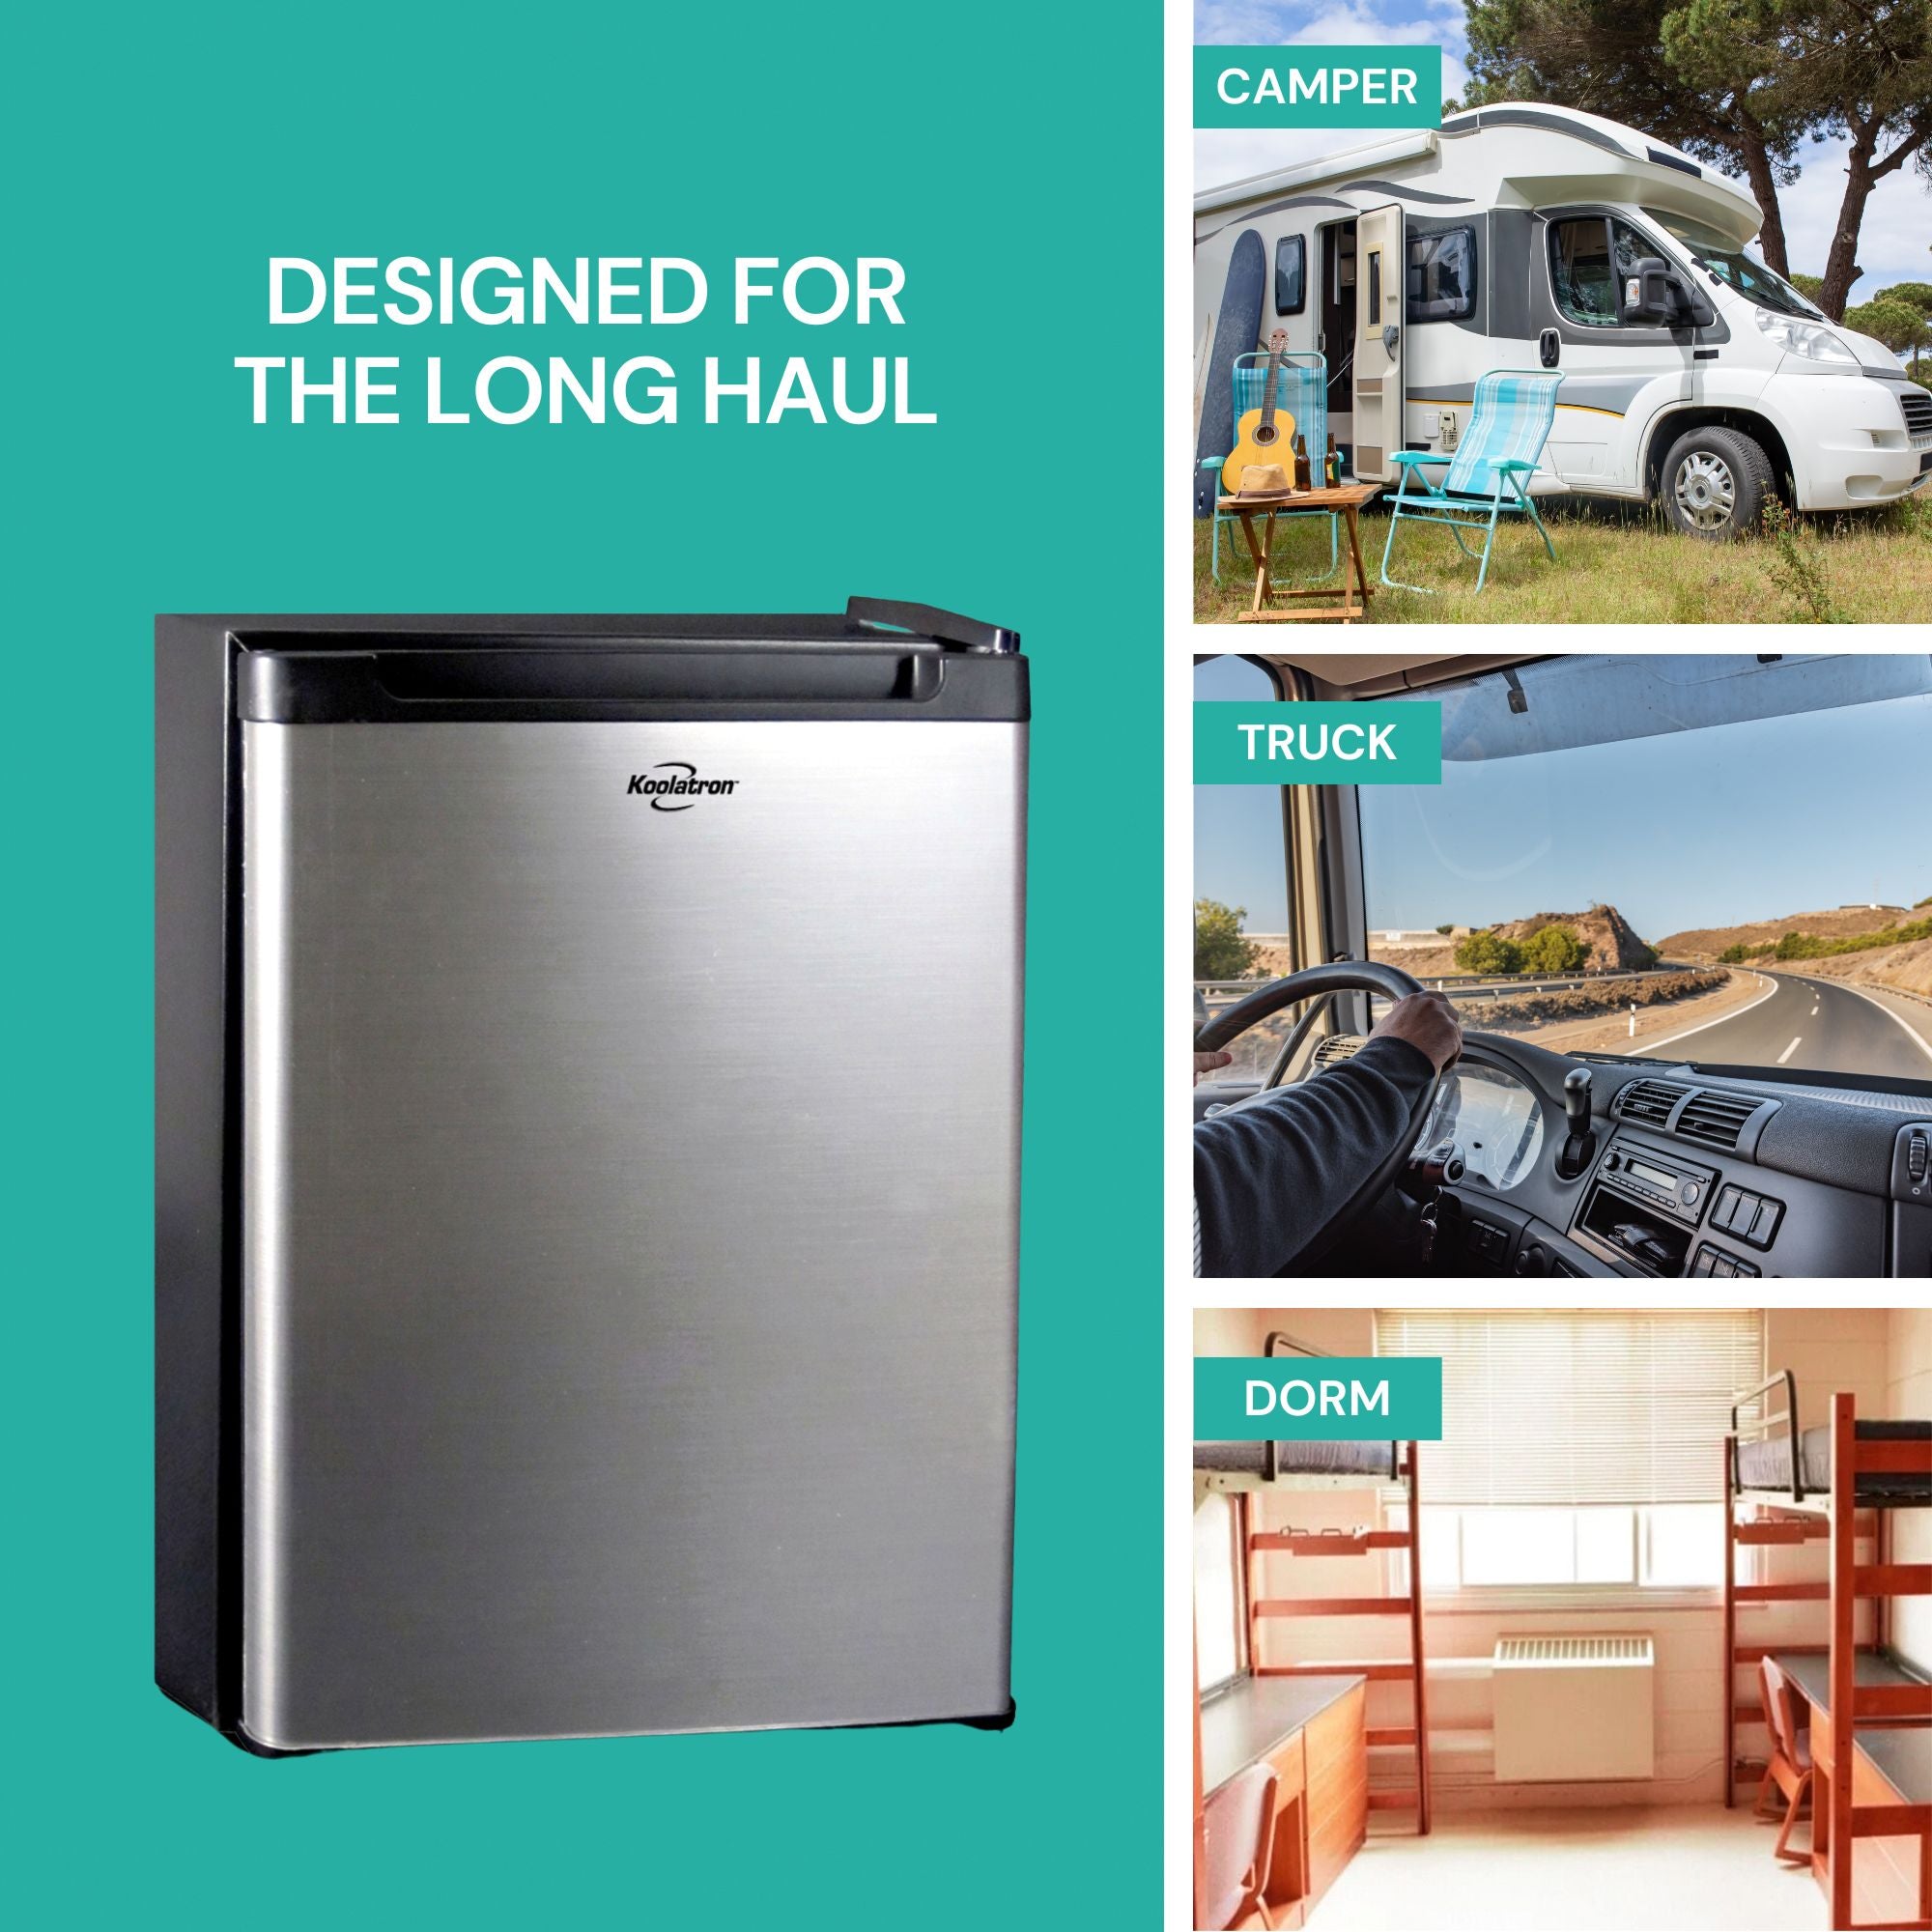 Black and stainless steel compact fridge, closed, on an aqua background with text above reading, "Designed for the long haul." Three pictures to the right show settings where the fridge could be used: Camper, truck, dorm